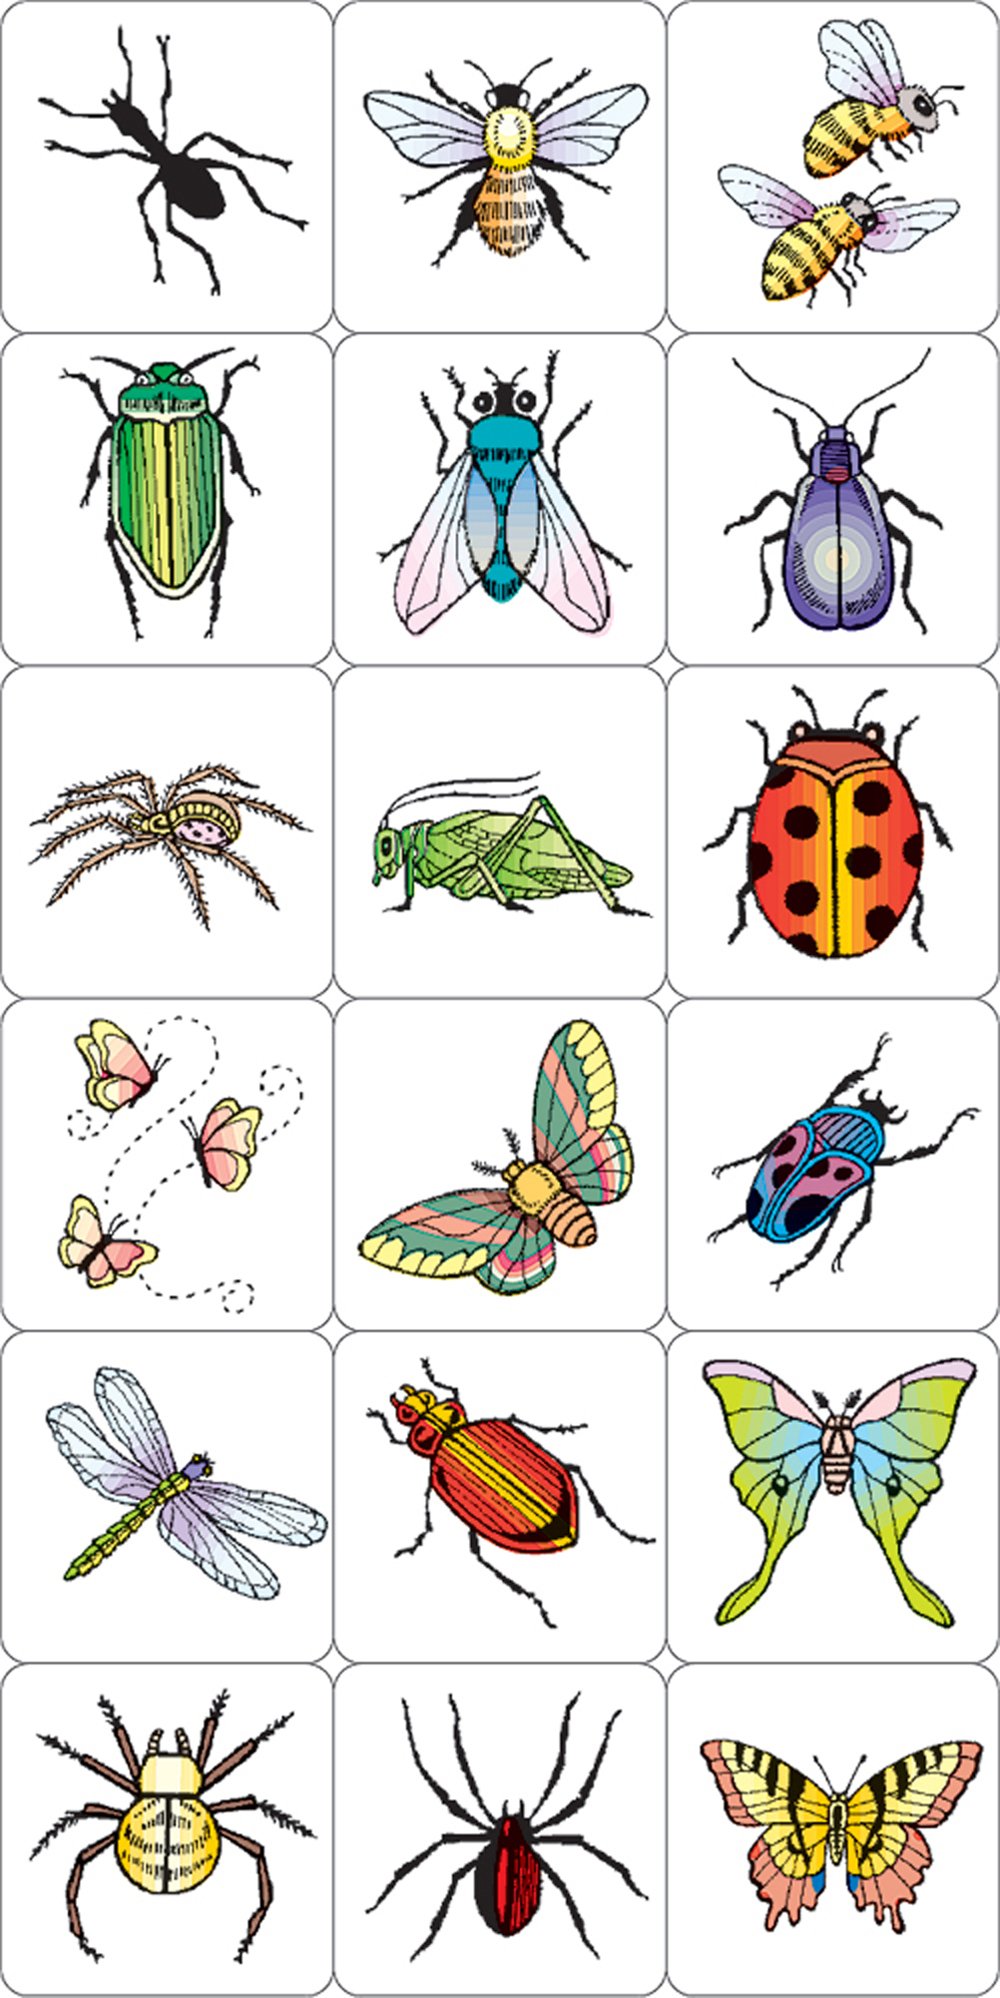 Insects & Spiders Rubber Stamp Kit